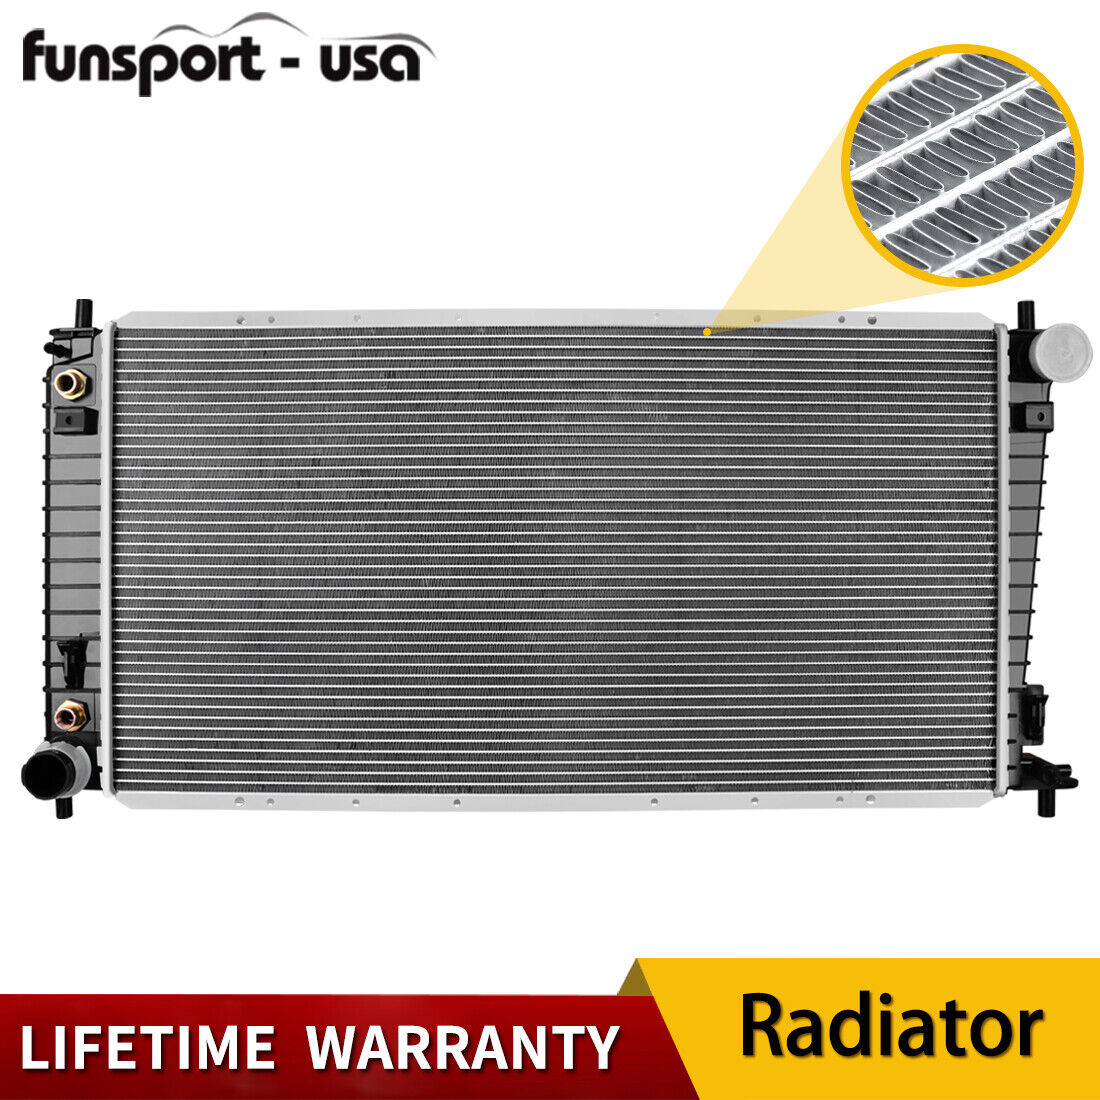 2257 Radiator For 1999-2003 Ford F150 4.2L 4.6L 5.4L / 99-02 Expedition 4.6 5.4L